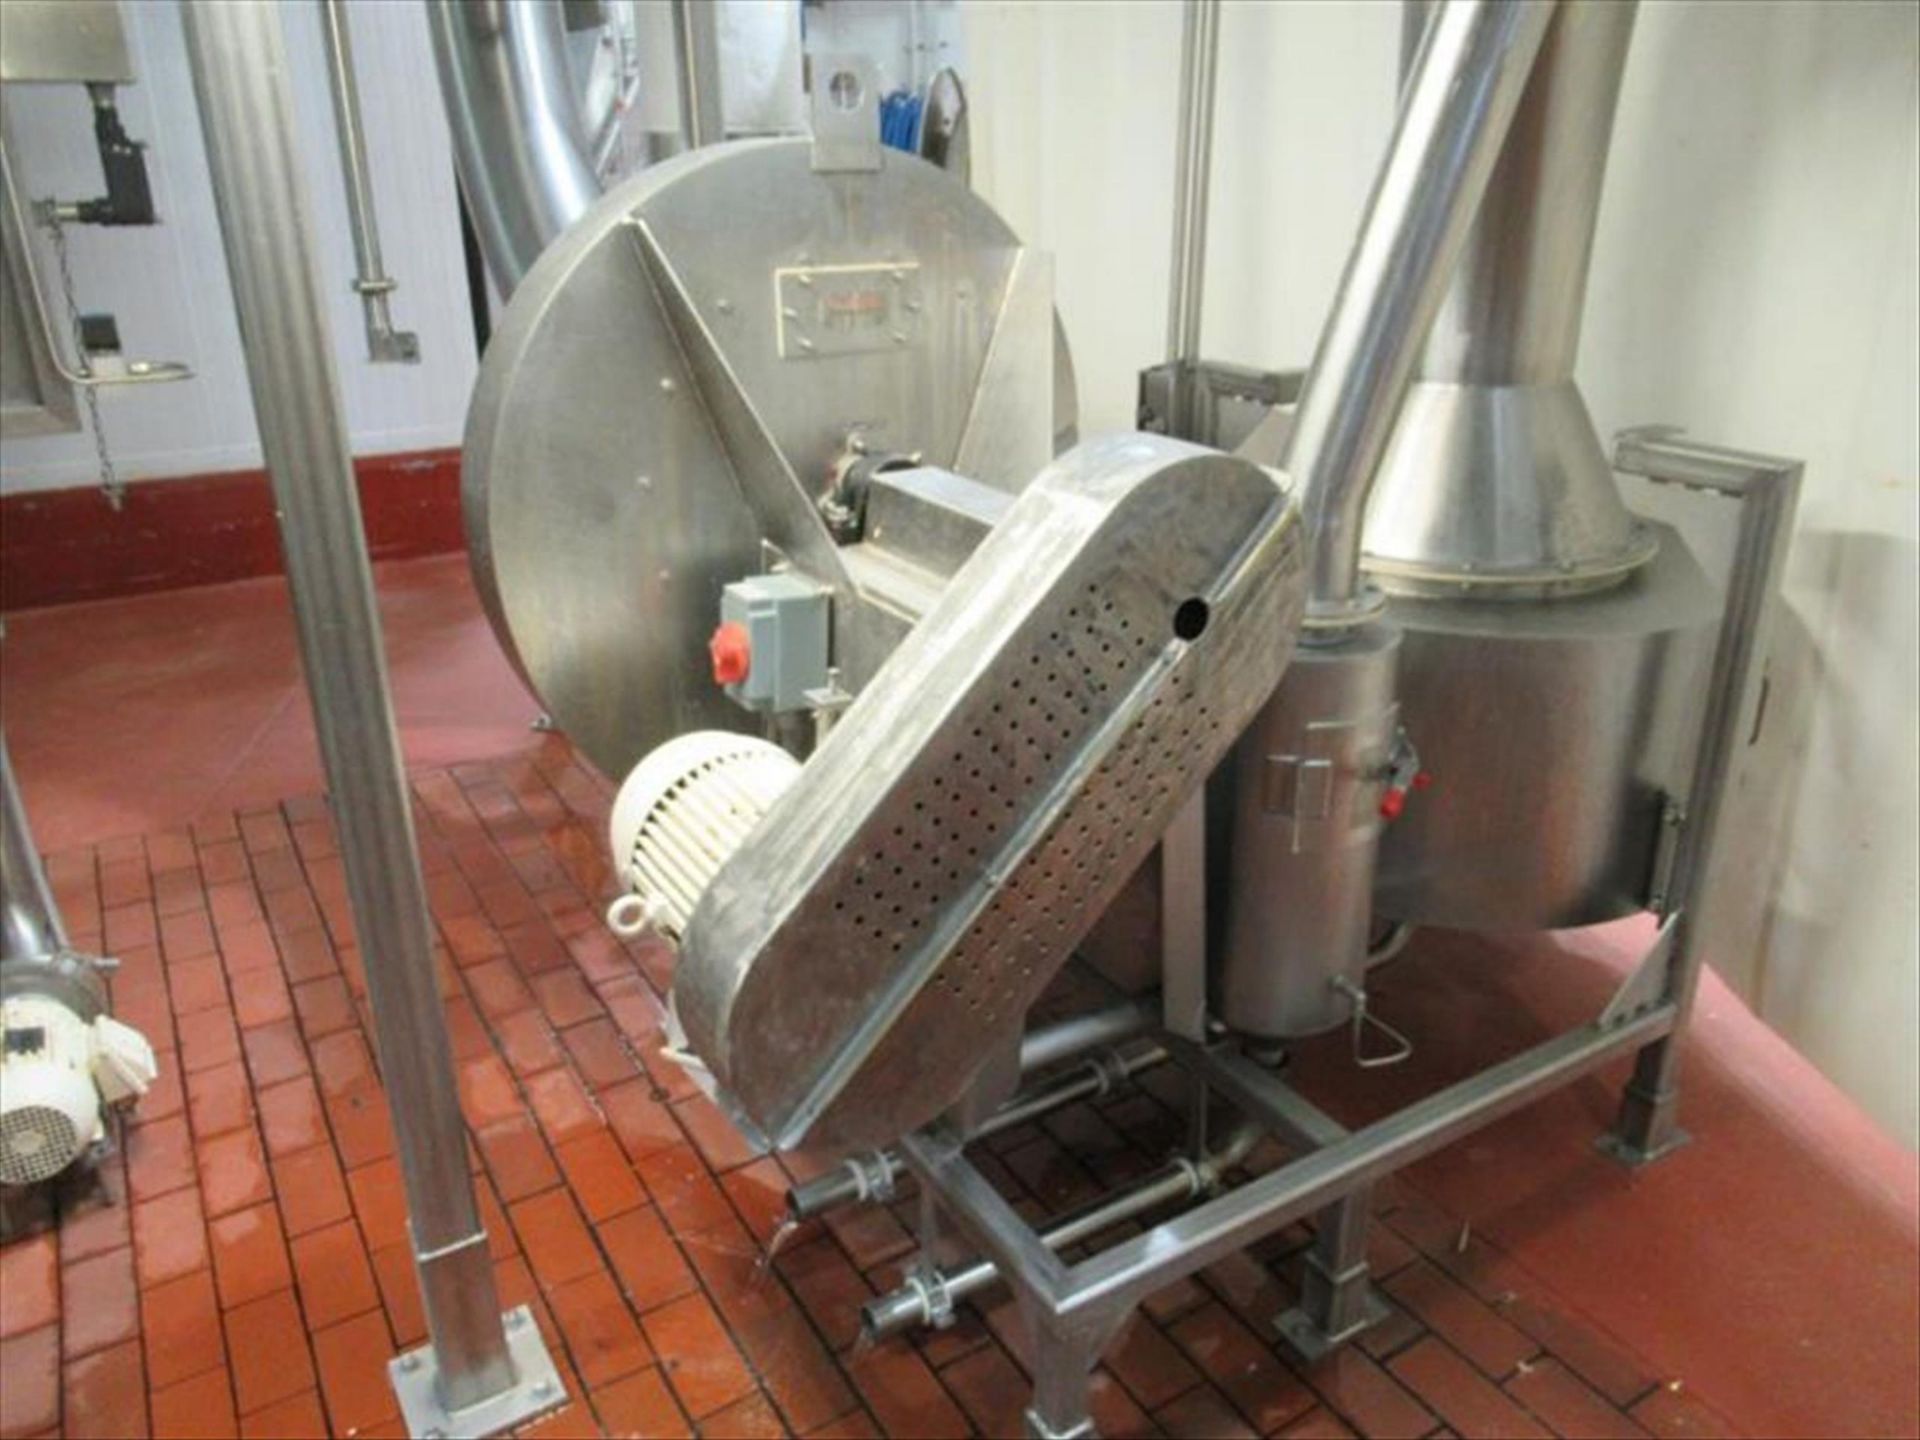 Rotoclone compact wet scrubber system mod. no. 1655182-003 ser. no. W12001 style WFQ12SS0C, size 12, - Image 2 of 2